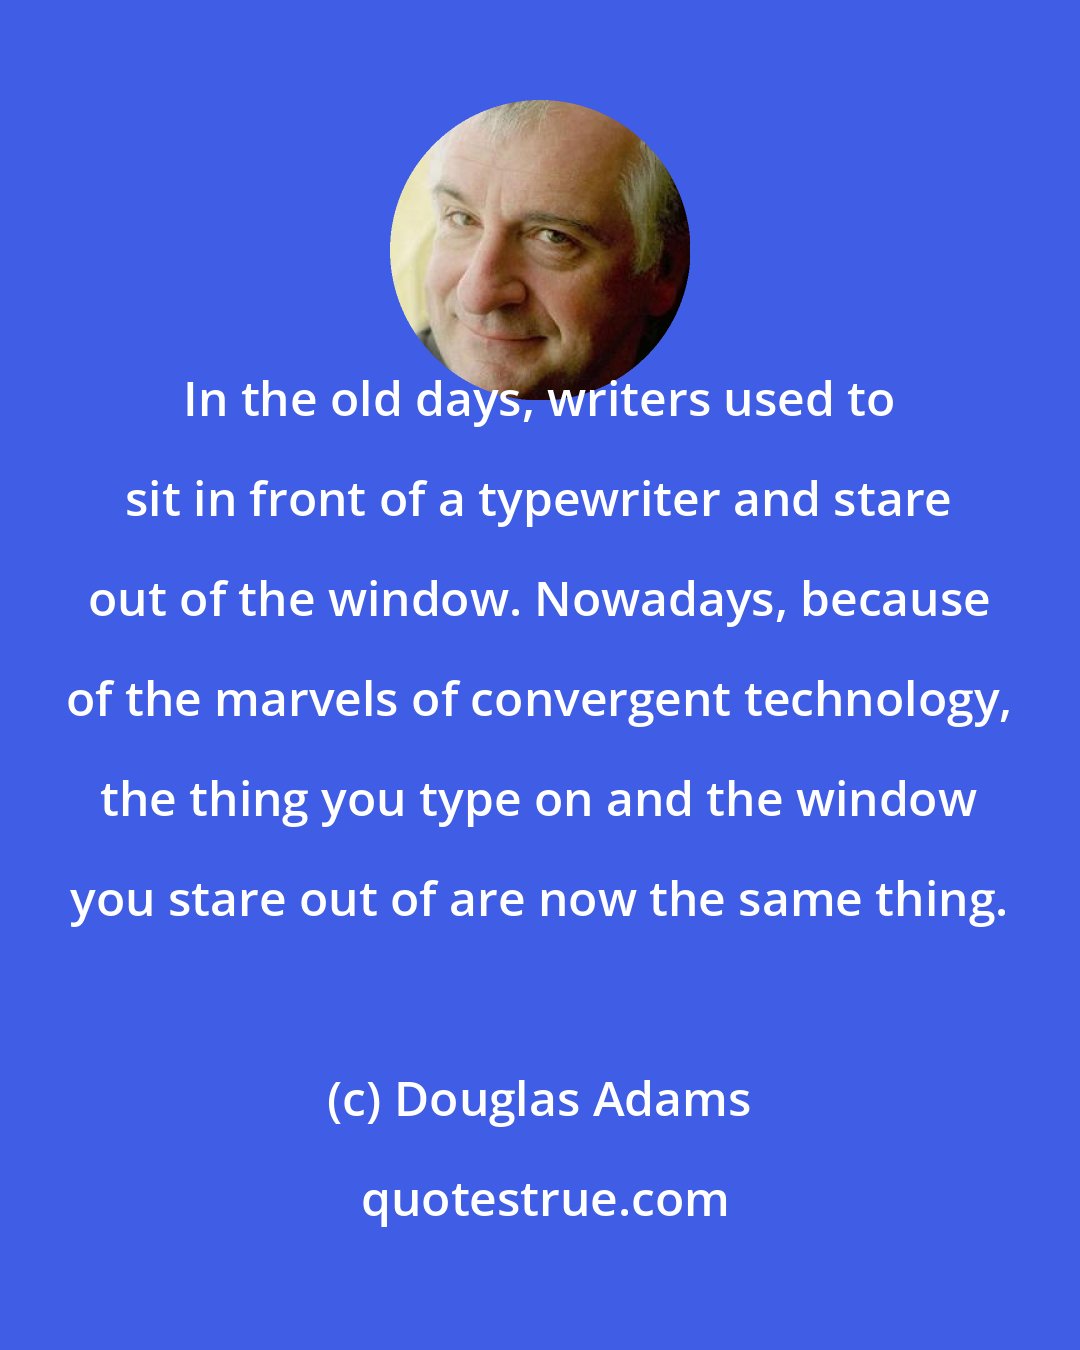 Douglas Adams: In the old days, writers used to sit in front of a typewriter and stare out of the window. Nowadays, because of the marvels of convergent technology, the thing you type on and the window you stare out of are now the same thing.